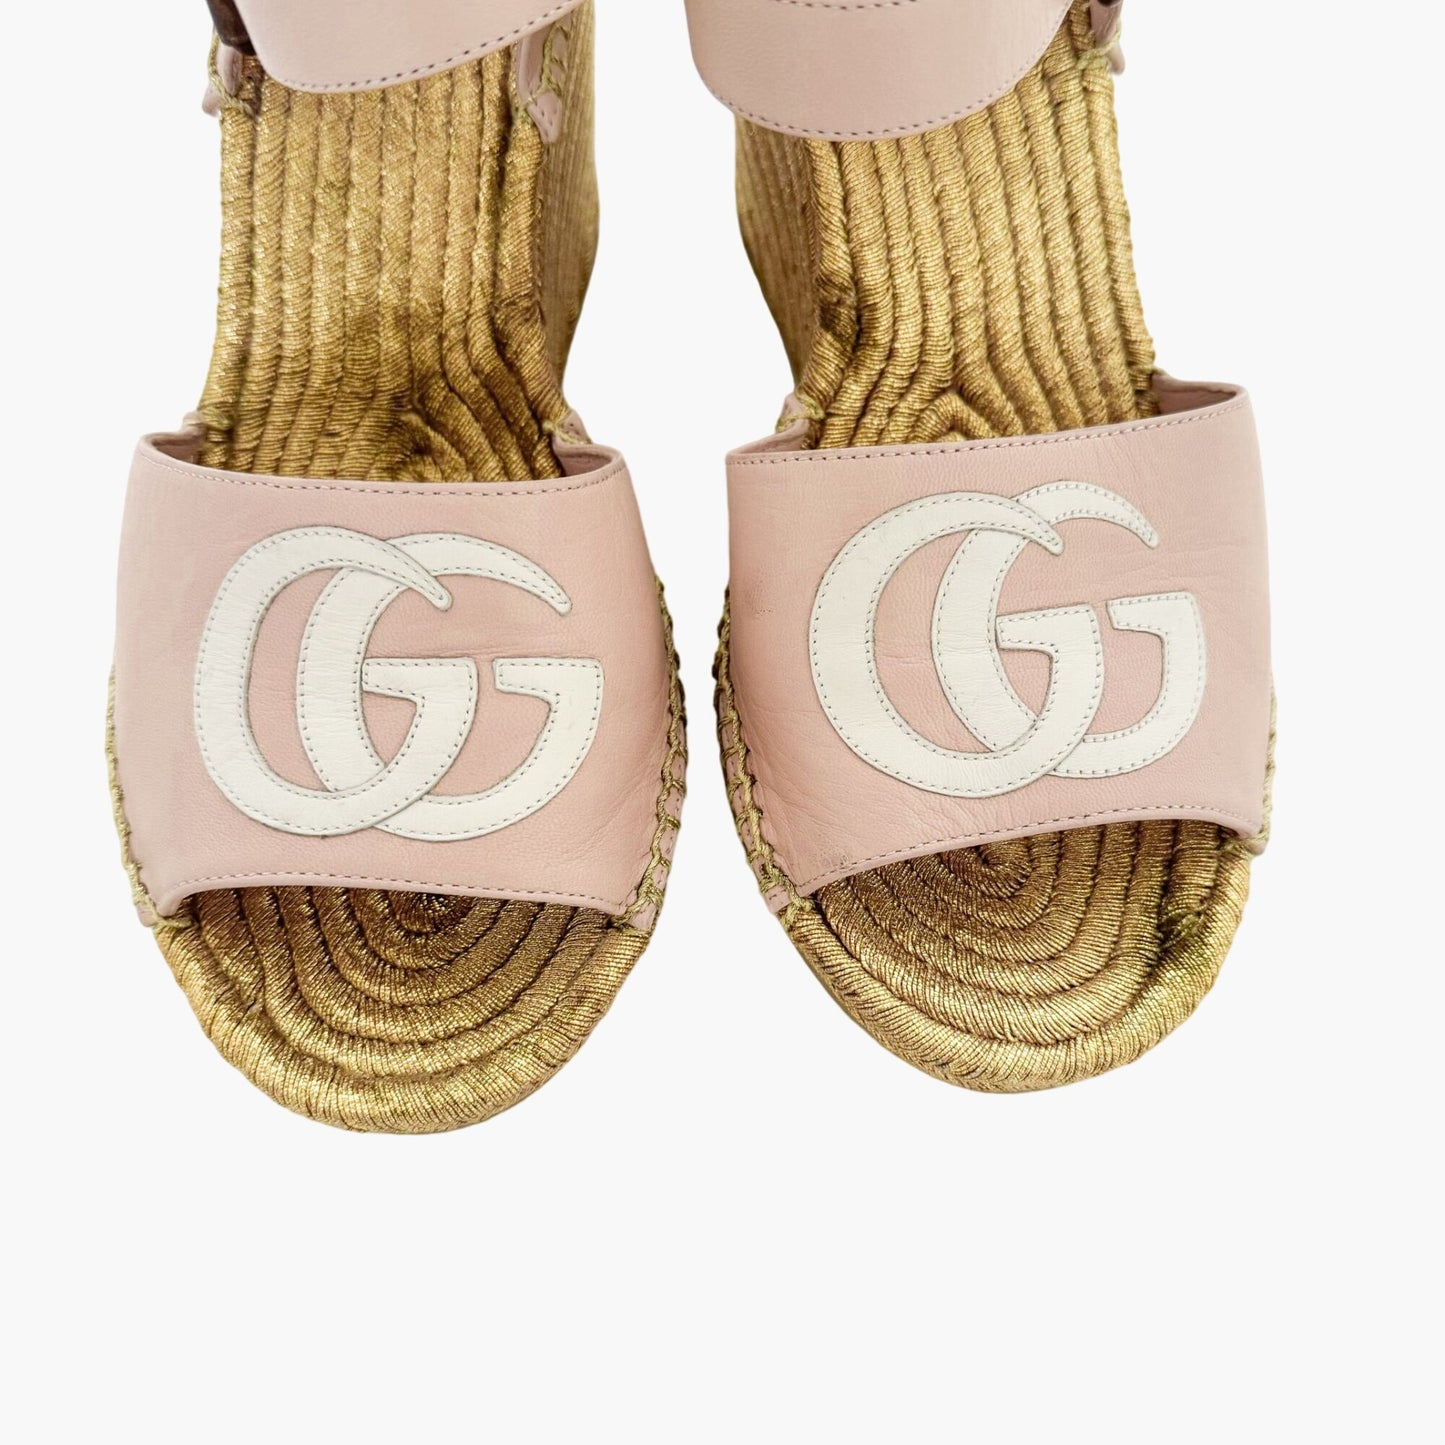 Gucci Flor GG Espadrille Wedge Sandals in Pink & Gold Leather Size 39.5